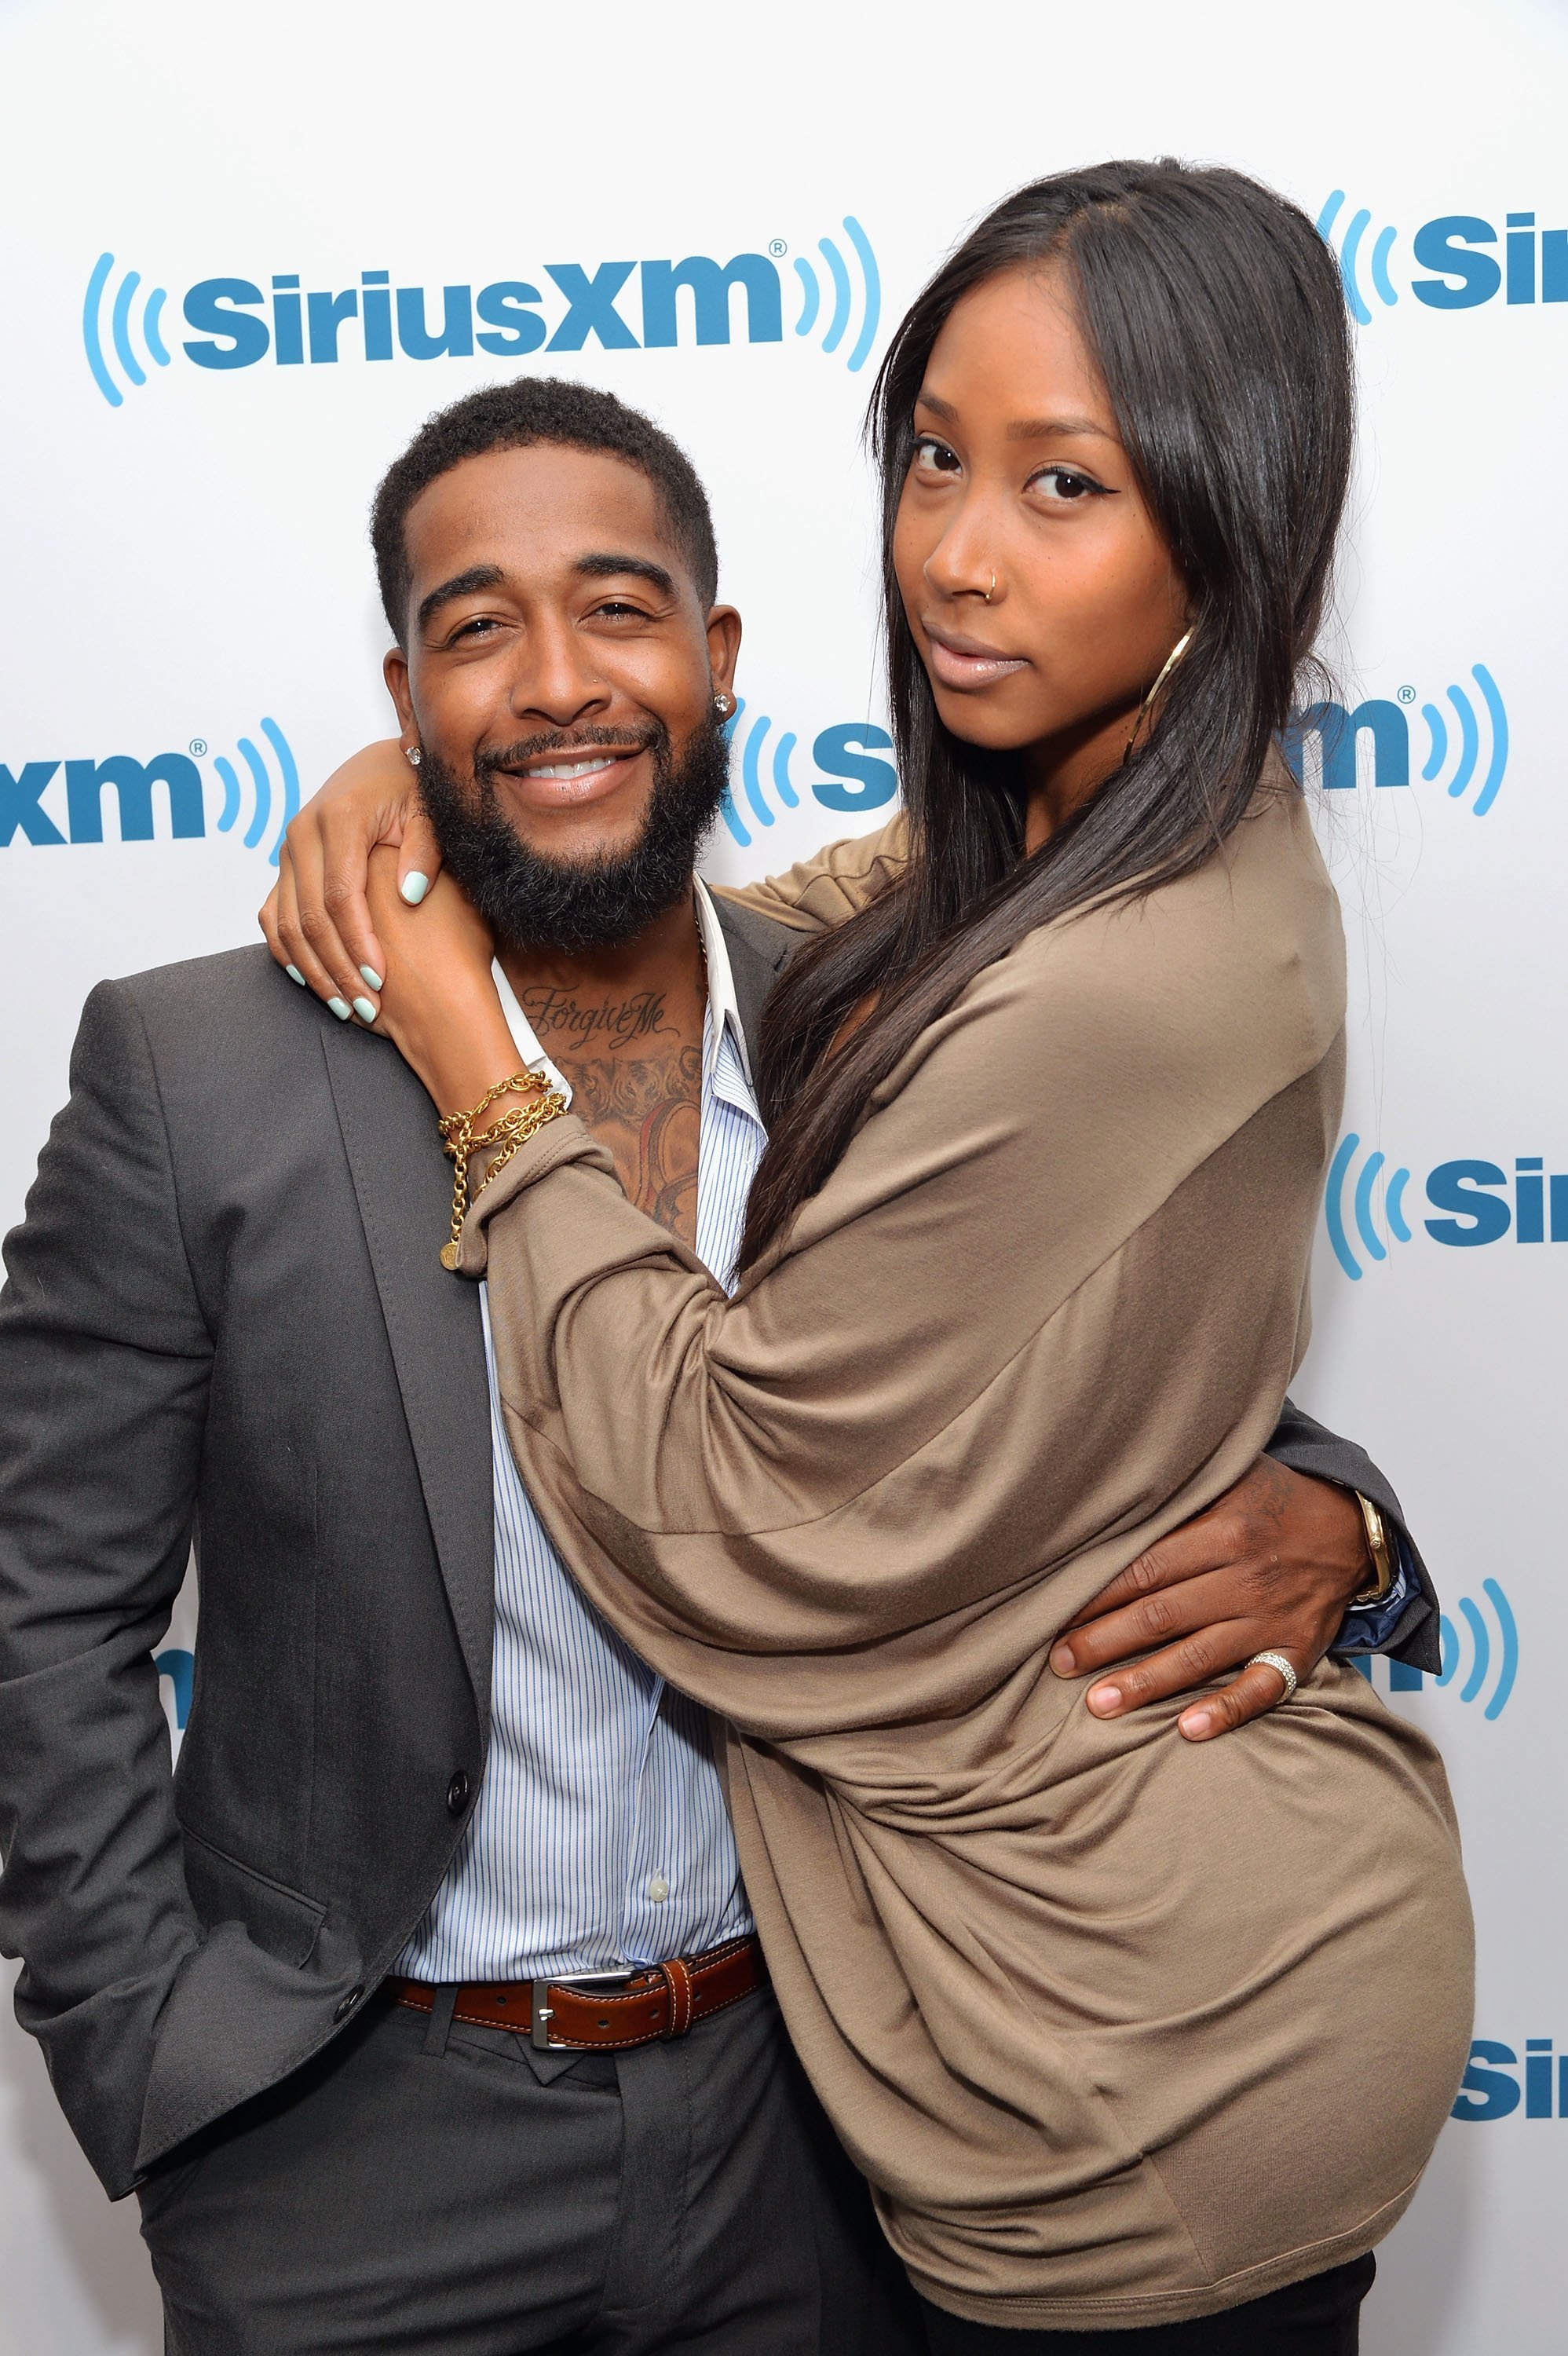 Omarion & Apryl Jones visit SiriusXM Studios on May 1, 2014 in New York City | Photo: Getty Images